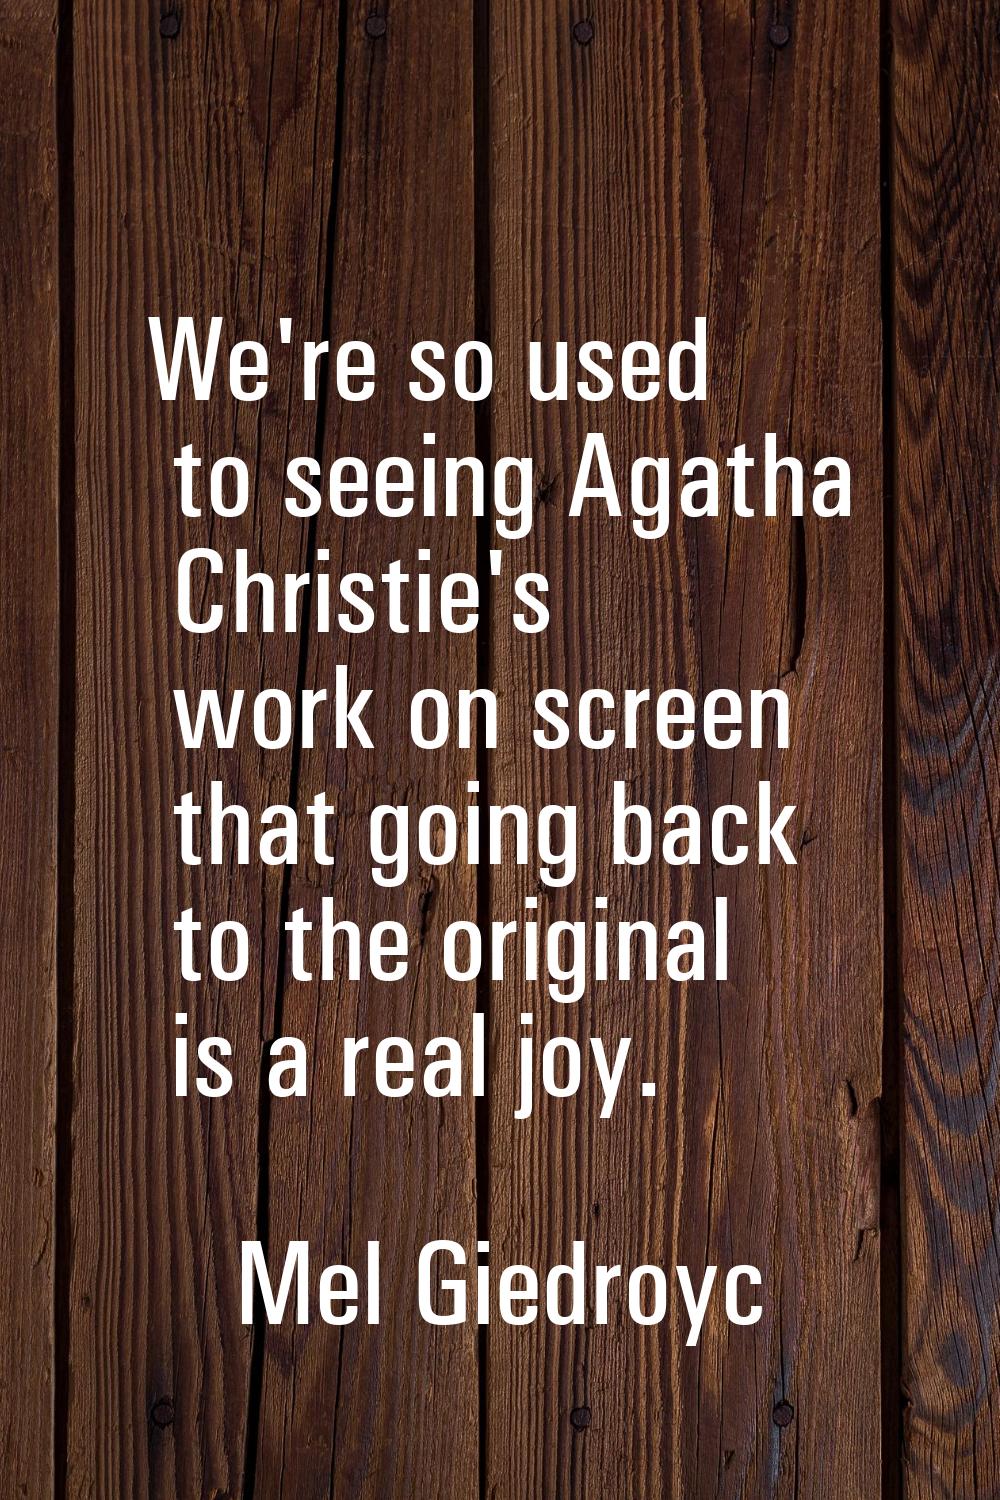 We're so used to seeing Agatha Christie's work on screen that going back to the original is a real 